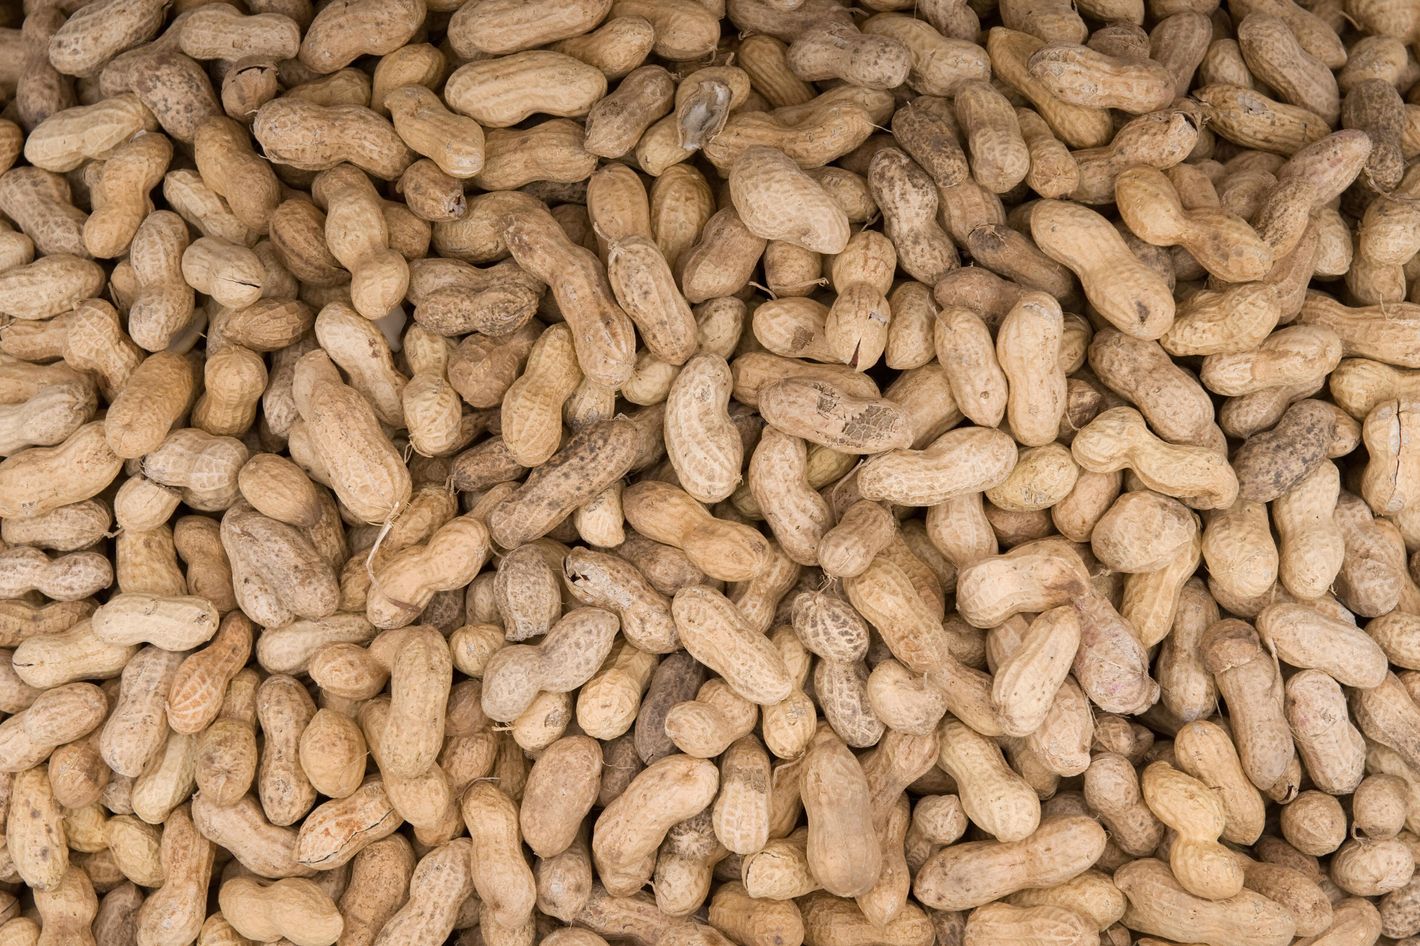 Monkey Nuts Recalled Because People Don't Realize They're Actually Peanuts